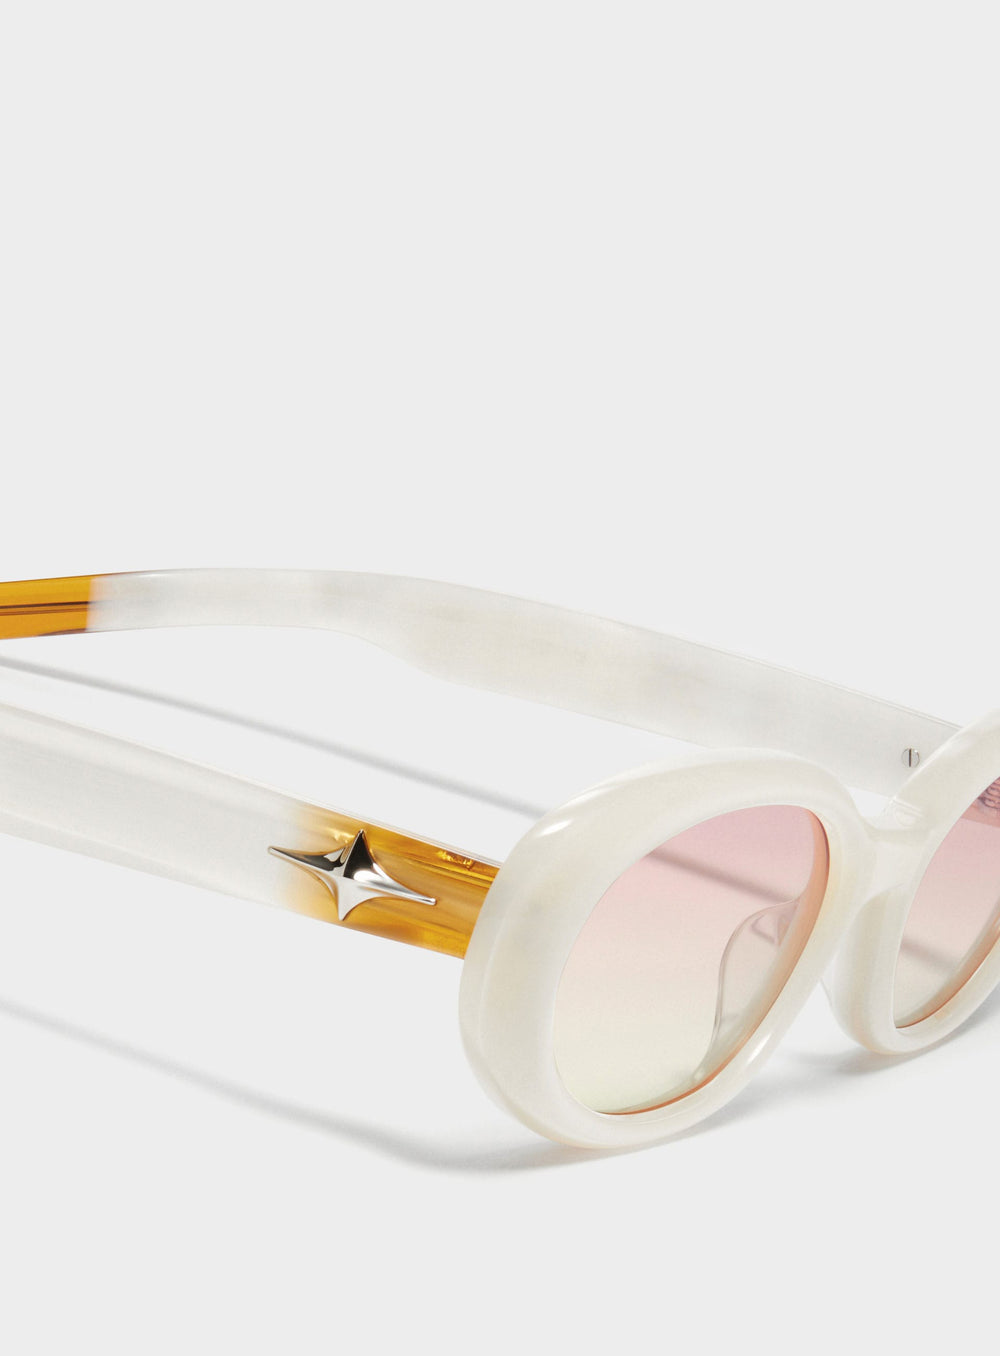 Close-up of Crux in white round Sunglasses lenses, high-quality eyewear by Mercury Retrograde Galaxy Collection 